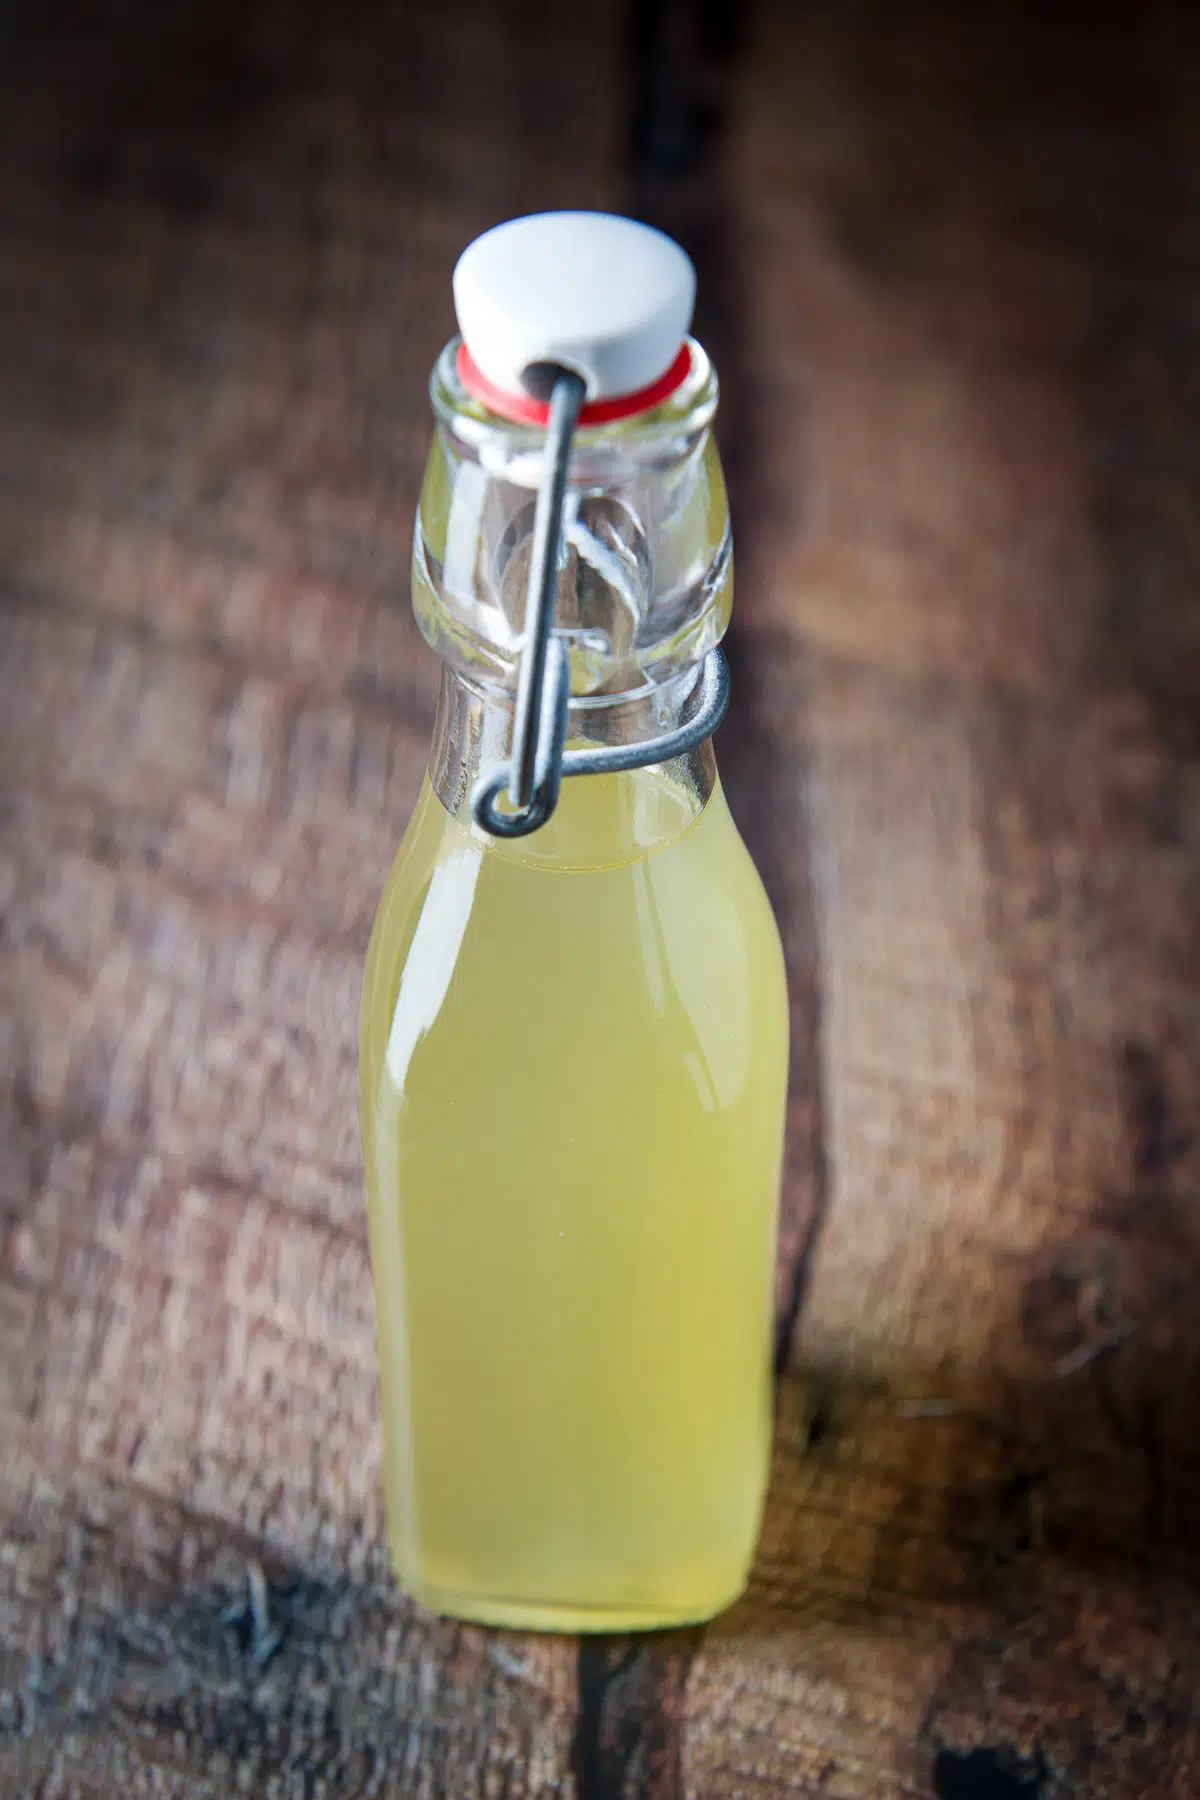 A bottle filled with a yellowish syrup